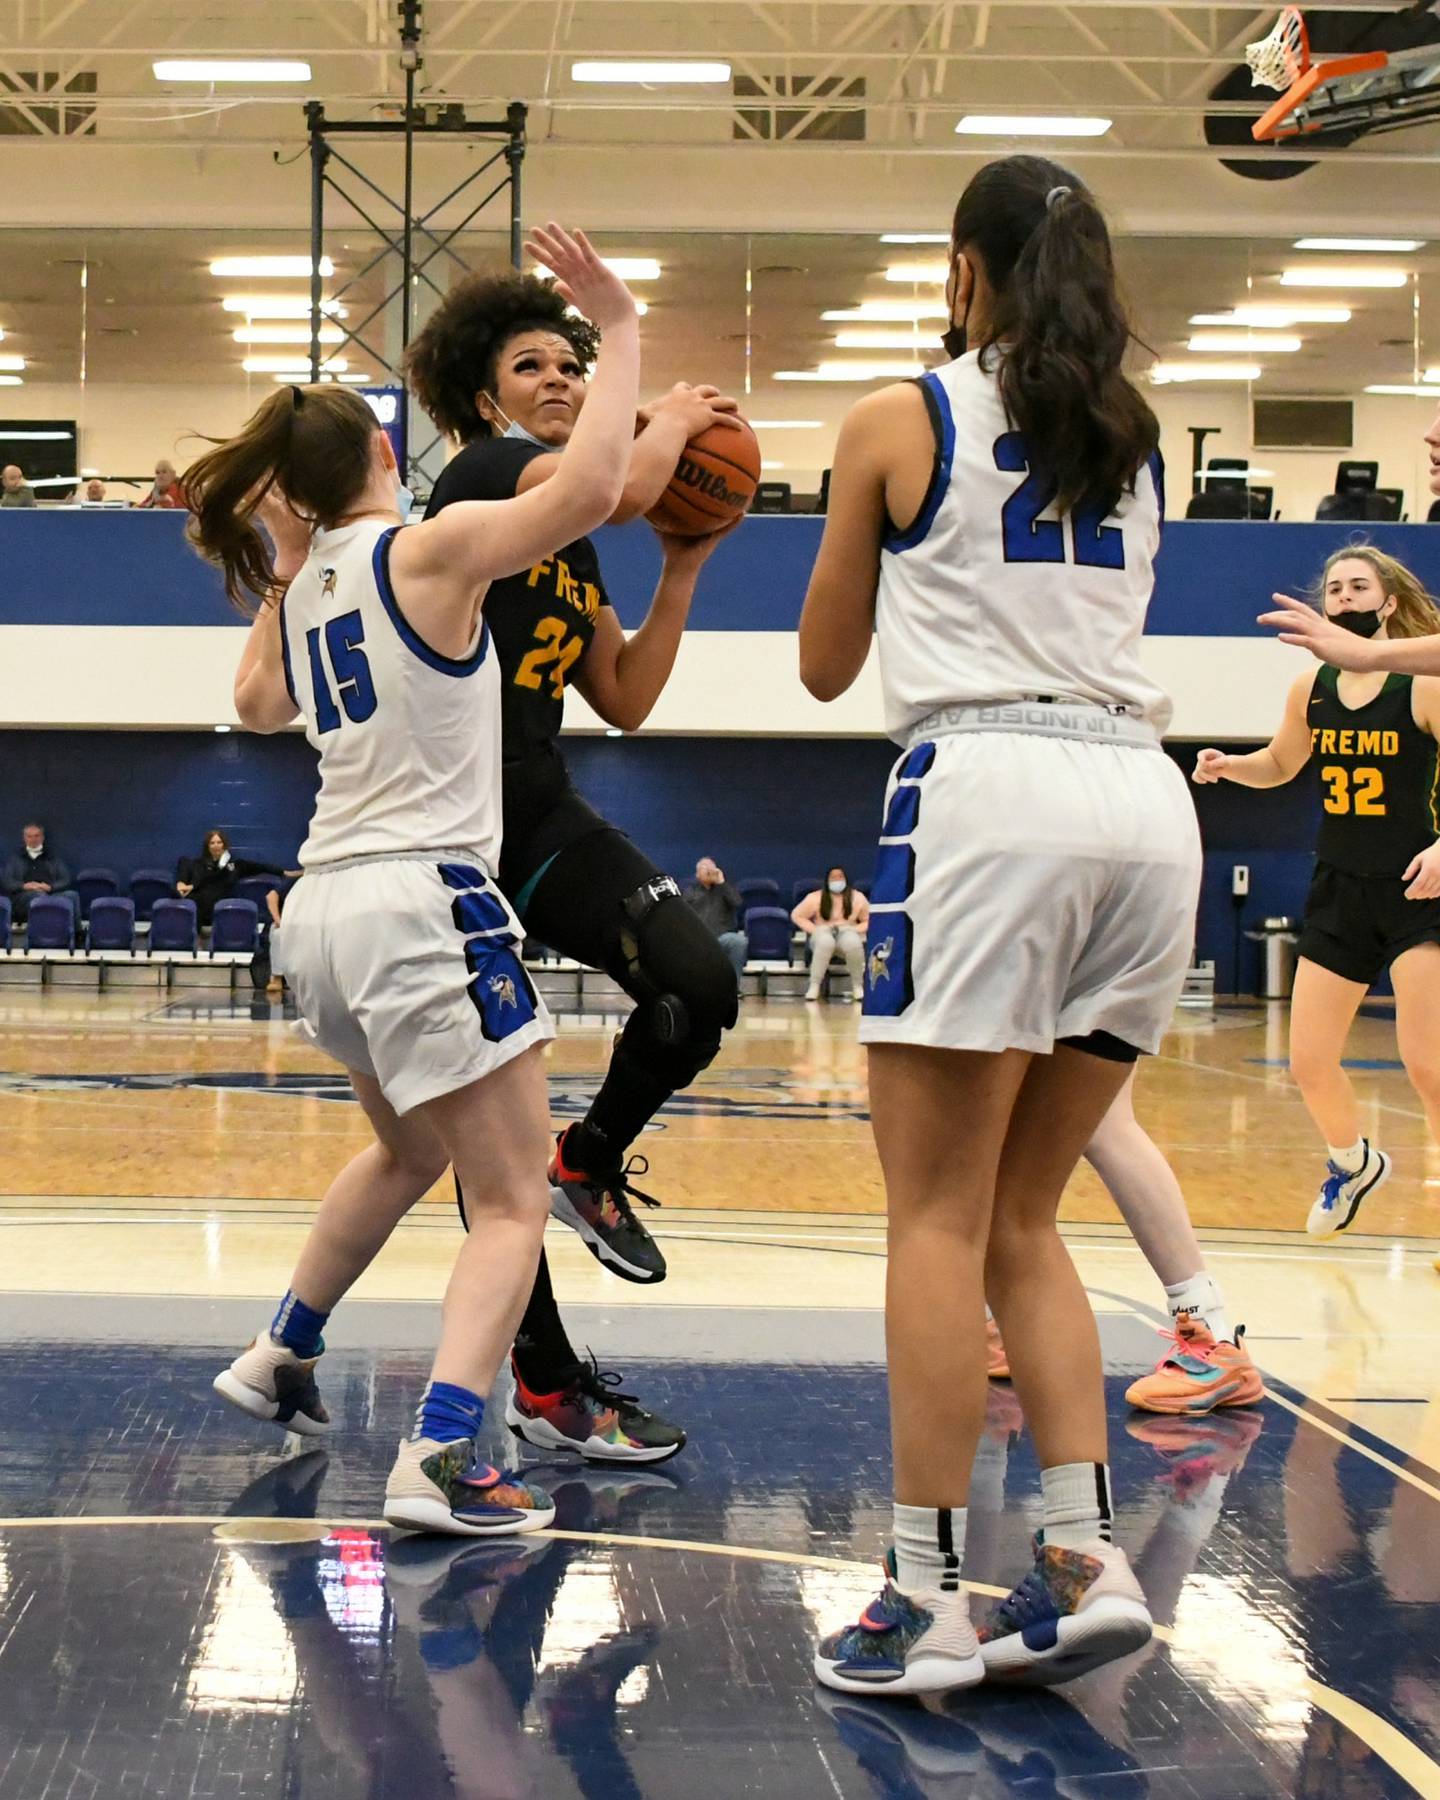 Fremd Brianna Wooldrige (24) makes a basket in the second quarter while being defended by Geneva Cassidy Arni (15) on Thursday Dec. 30th during the championship game at Morton College in Cicero.